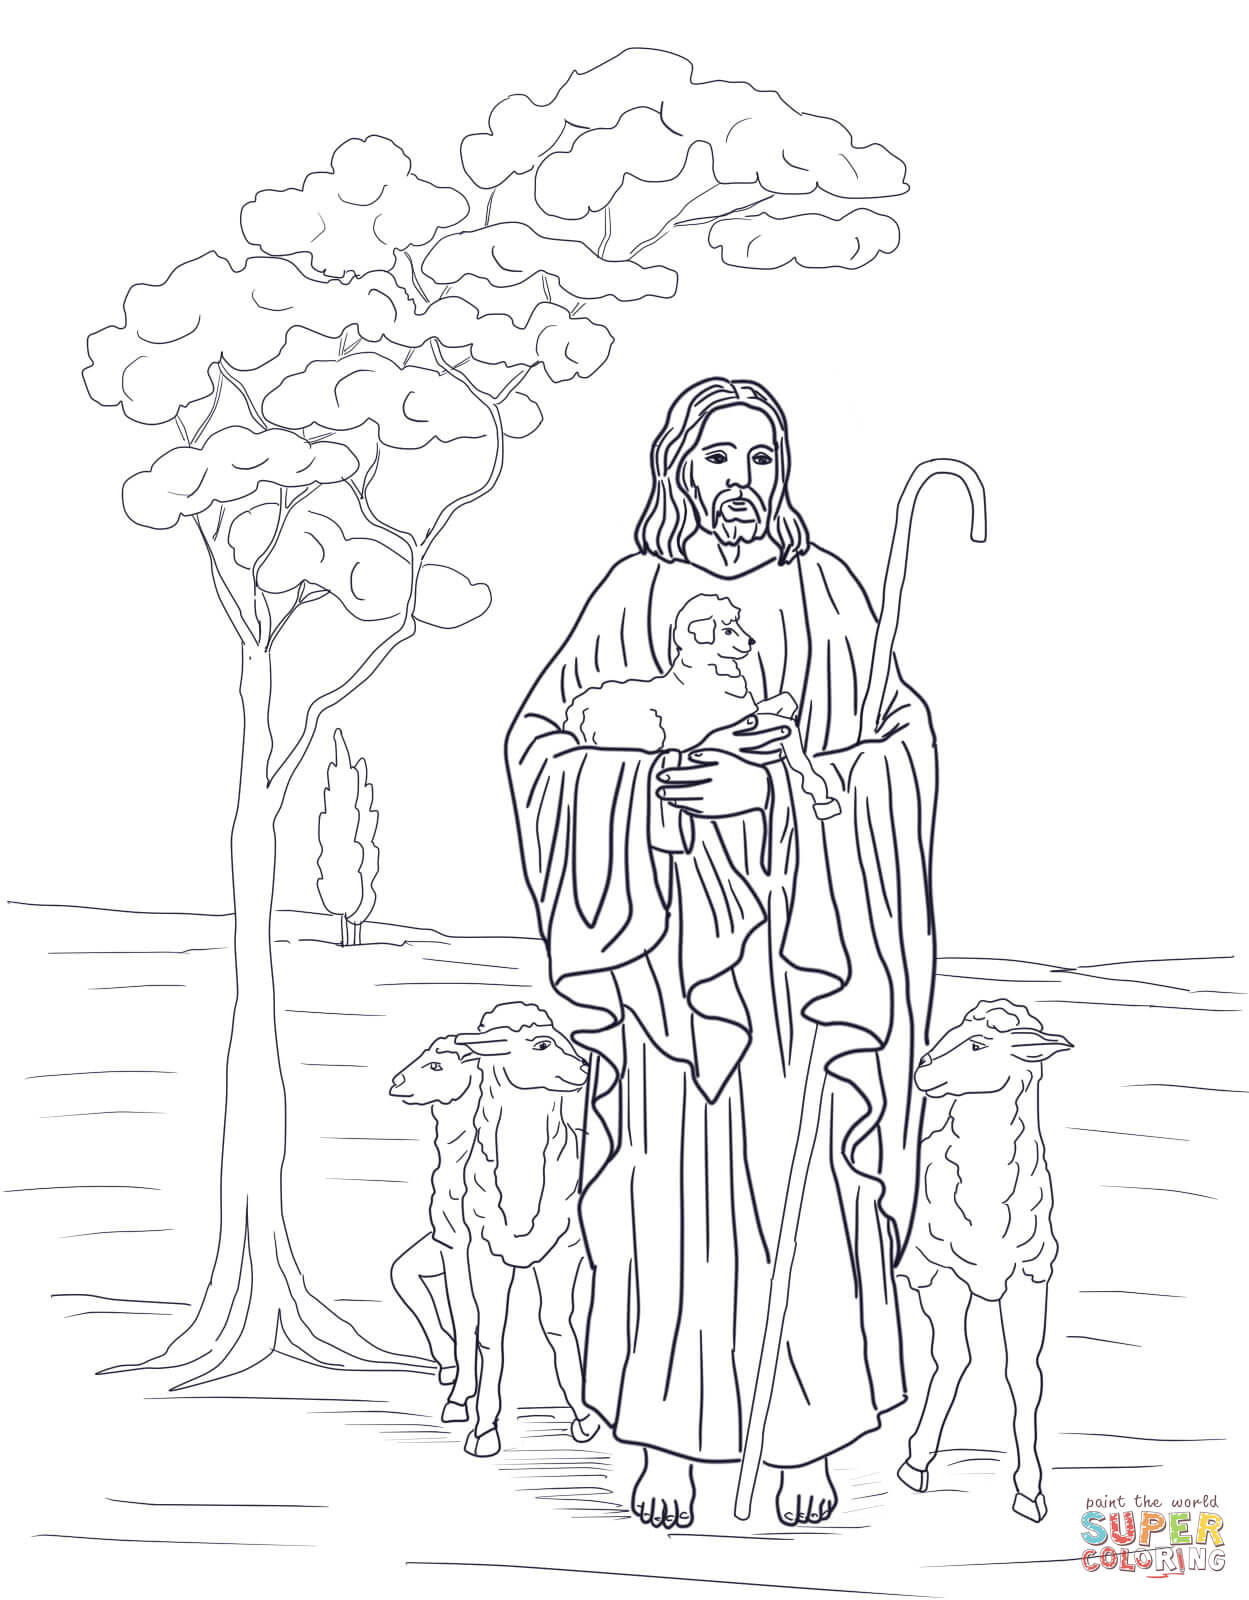 Jesus is the Good Shepherd coloring page | Free Printable Coloring ...